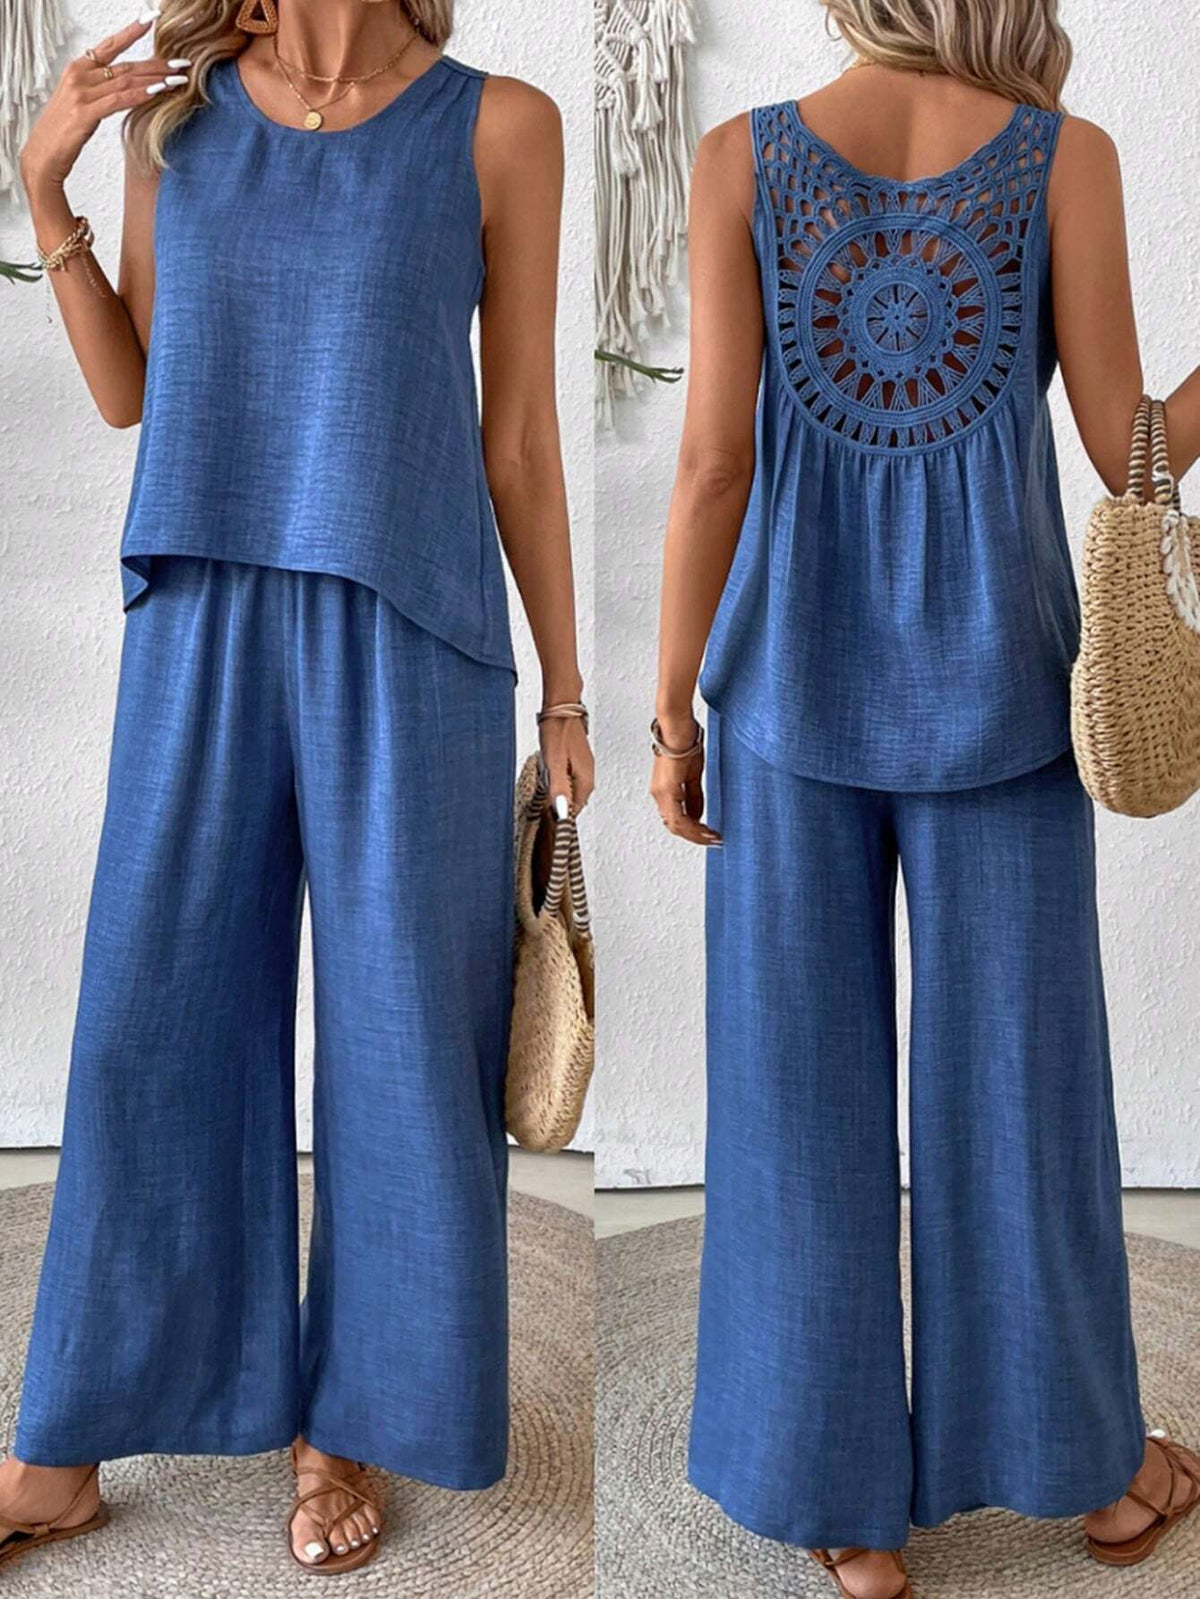 Women's Lace Patchwork Vest And Wide Leg Pants Set, Perfect For Summer Vacation